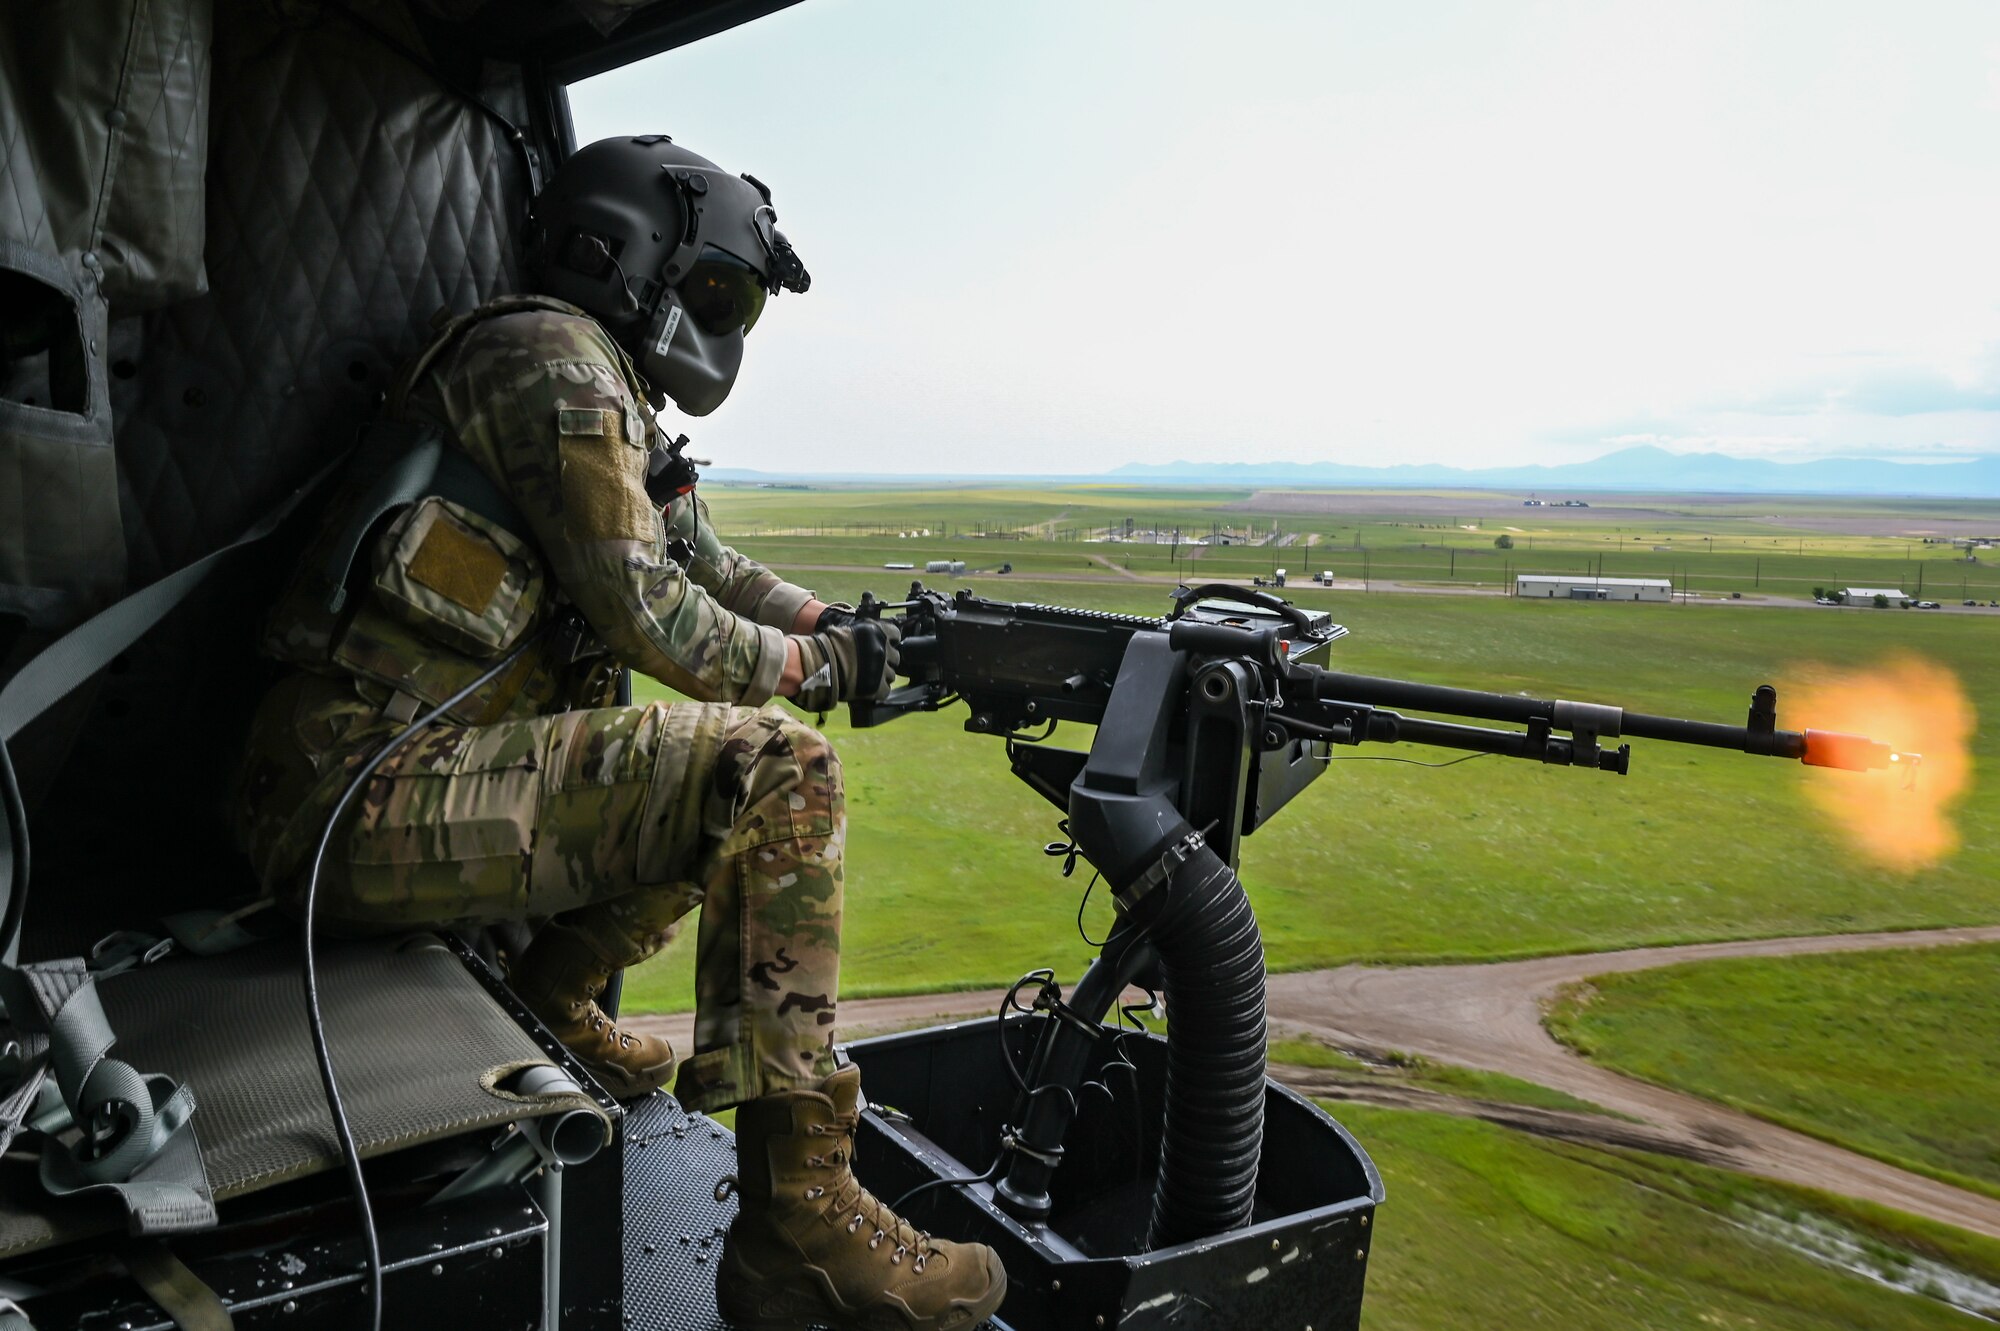 An Airman in uniform shoots blanks from an M240 machine gun out of a helicopter as it flies over green farmland.